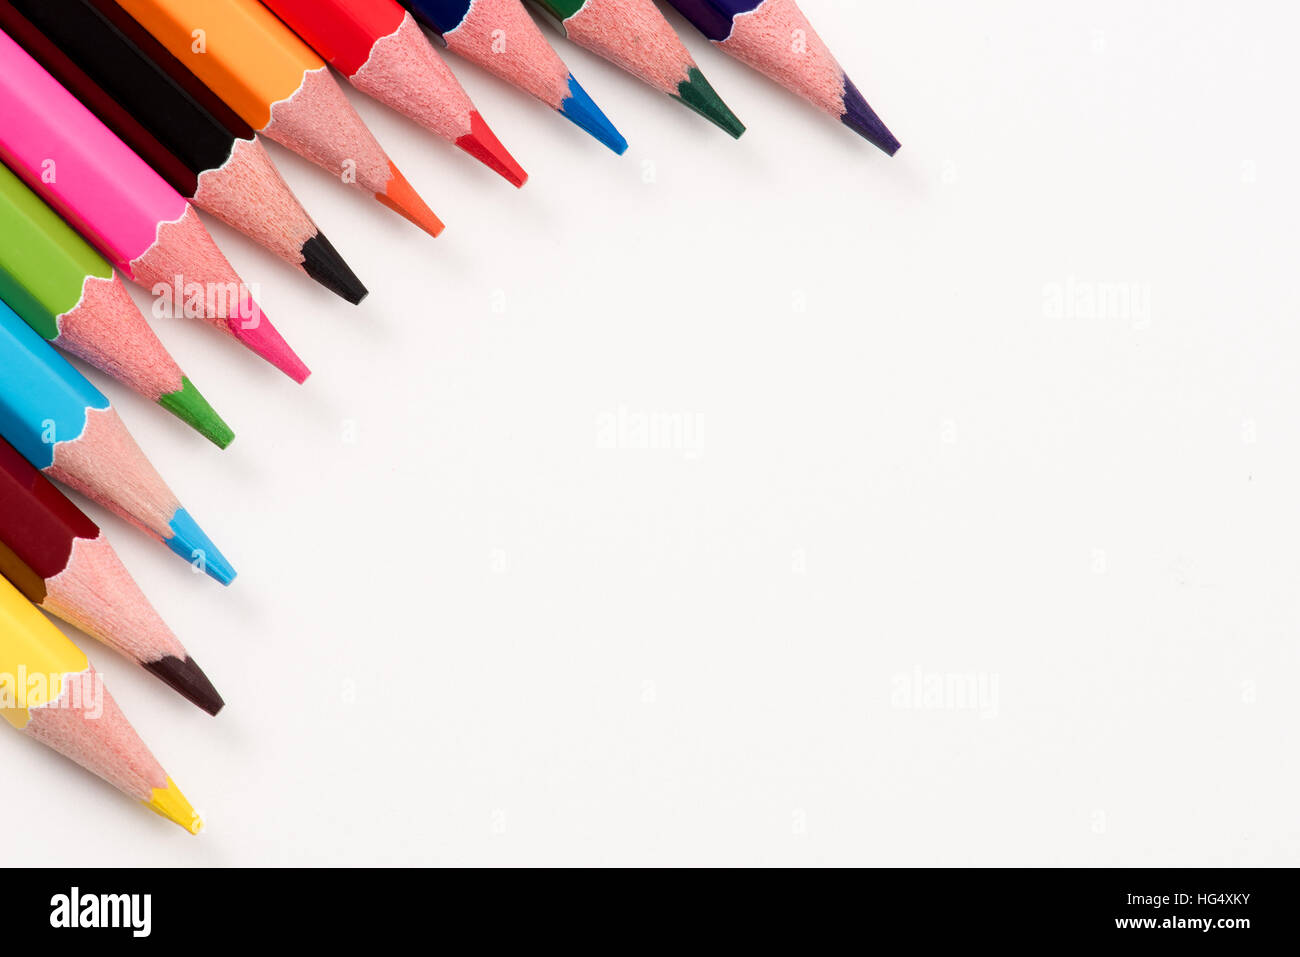 Colored pencils arranged on the table in natural light Stock Photo